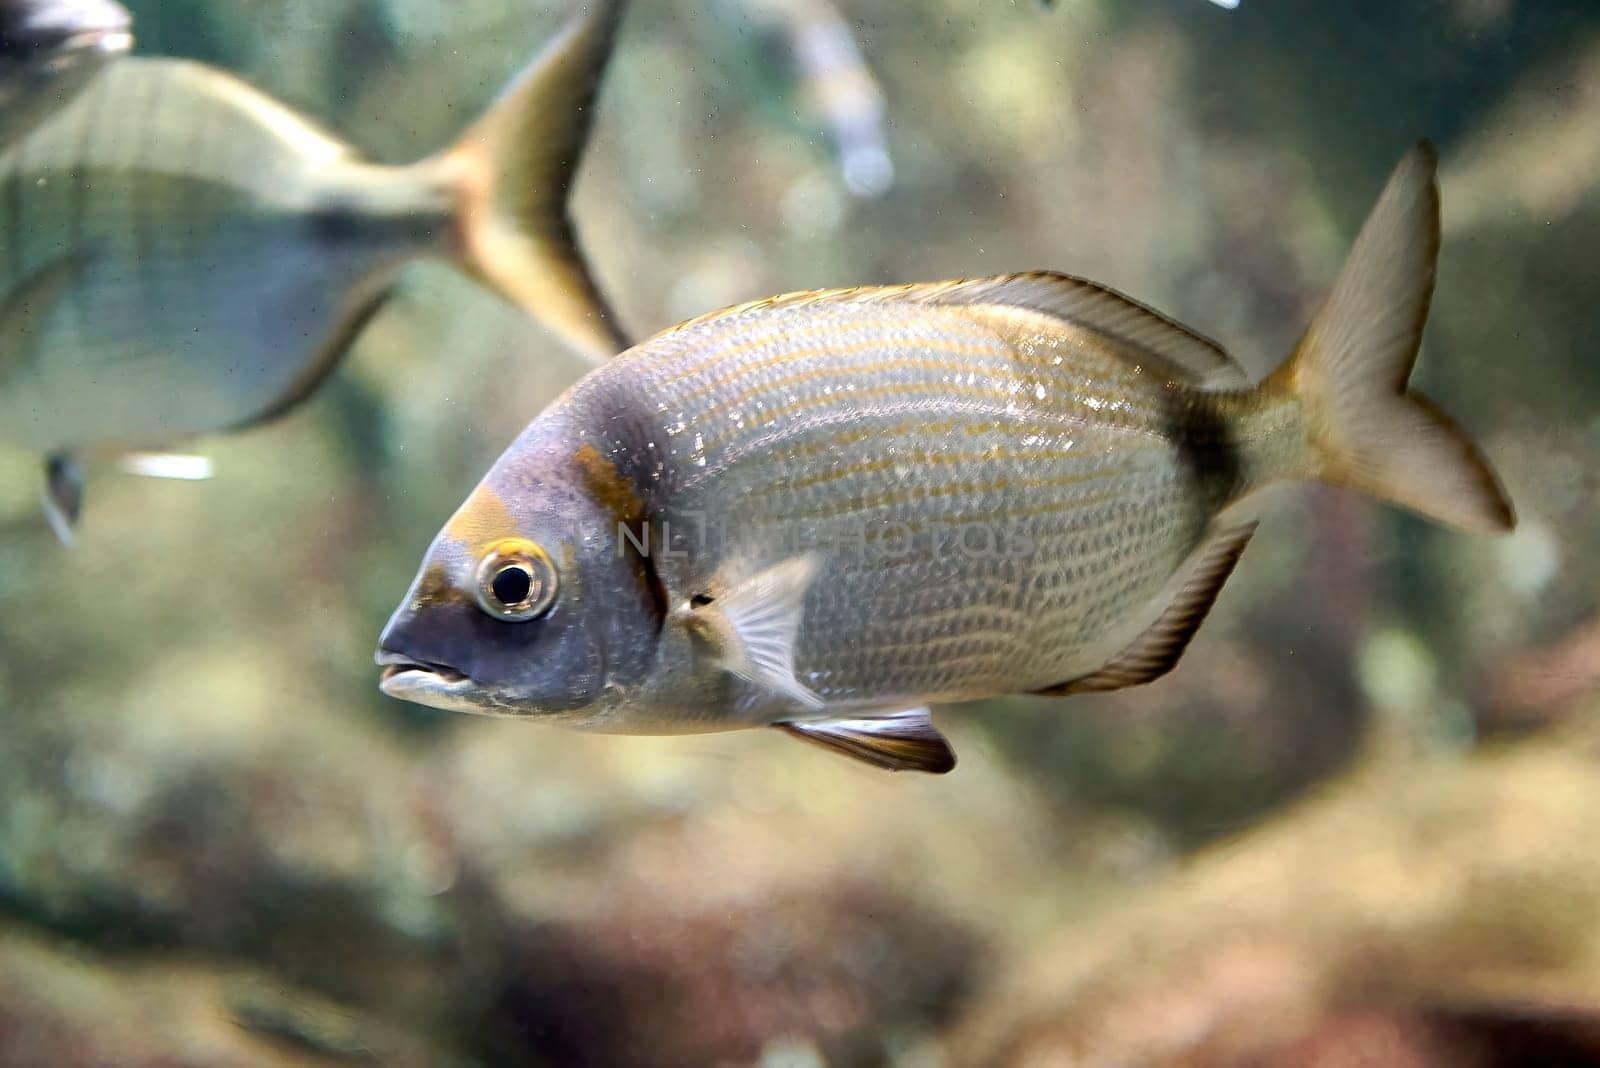 A sparrallion swimming in the ocean with other fish.blurred background, grey and black. Diplodus